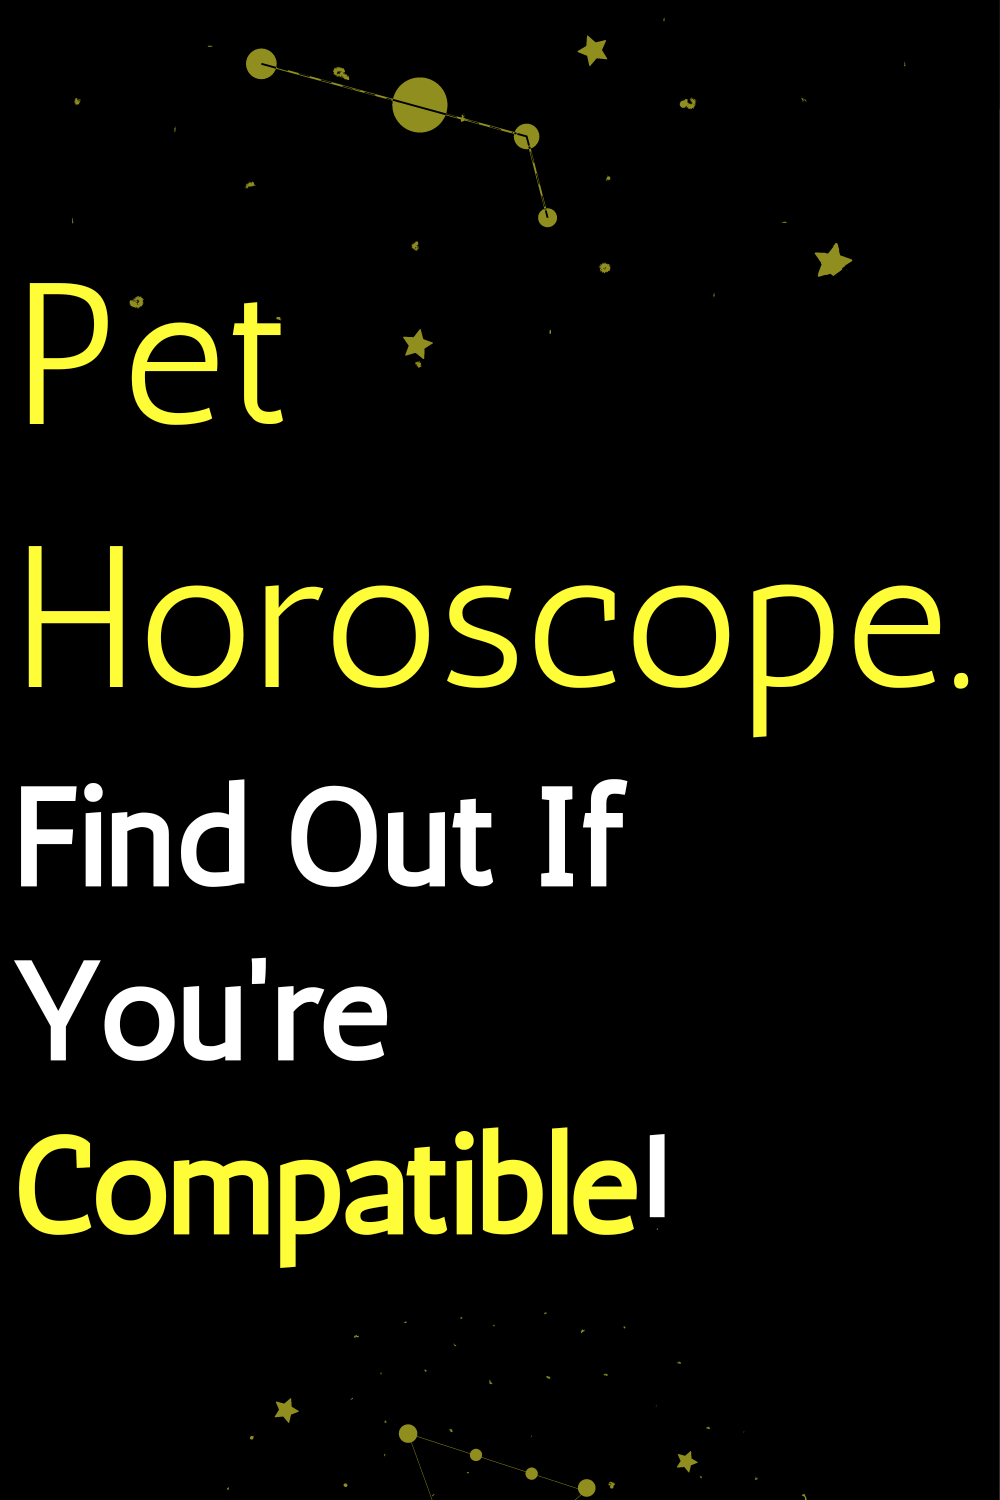 Pet Horoscope. Find Out If You're Compatible!